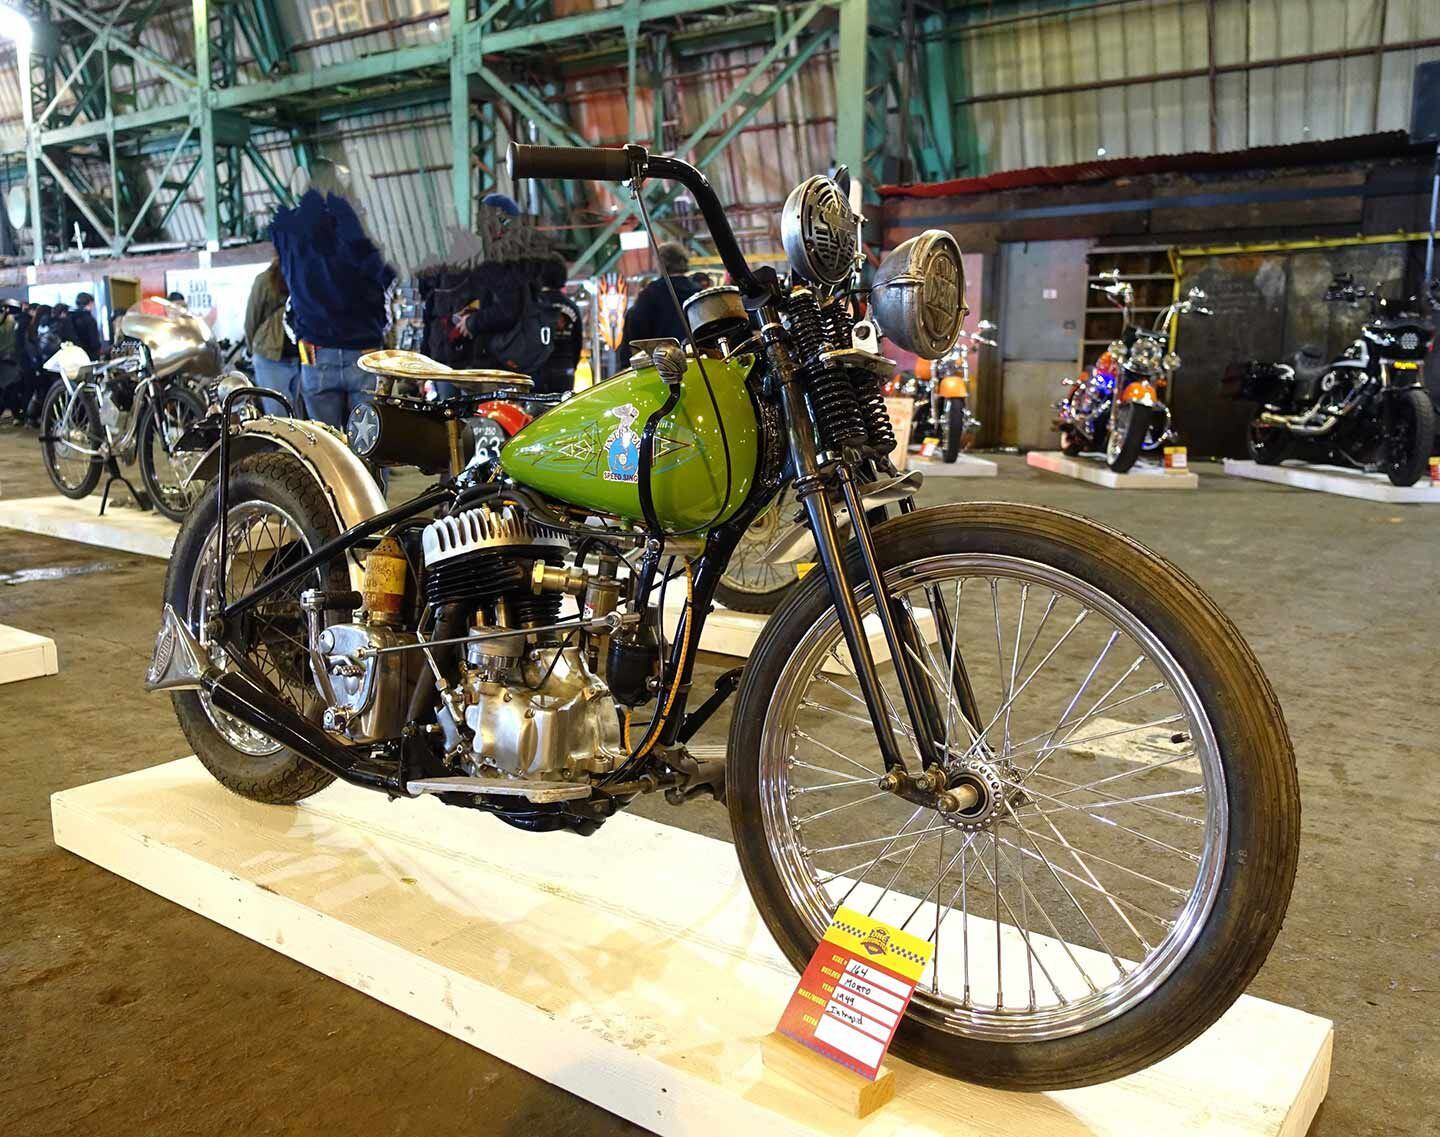 Neil “Morto” Olson won the Most DIY award for his 1949 Intrepid/Lutefisk Speed Single machine. The prize is handed out to bikes that “spare no expense on zip-ties and duct tape.”